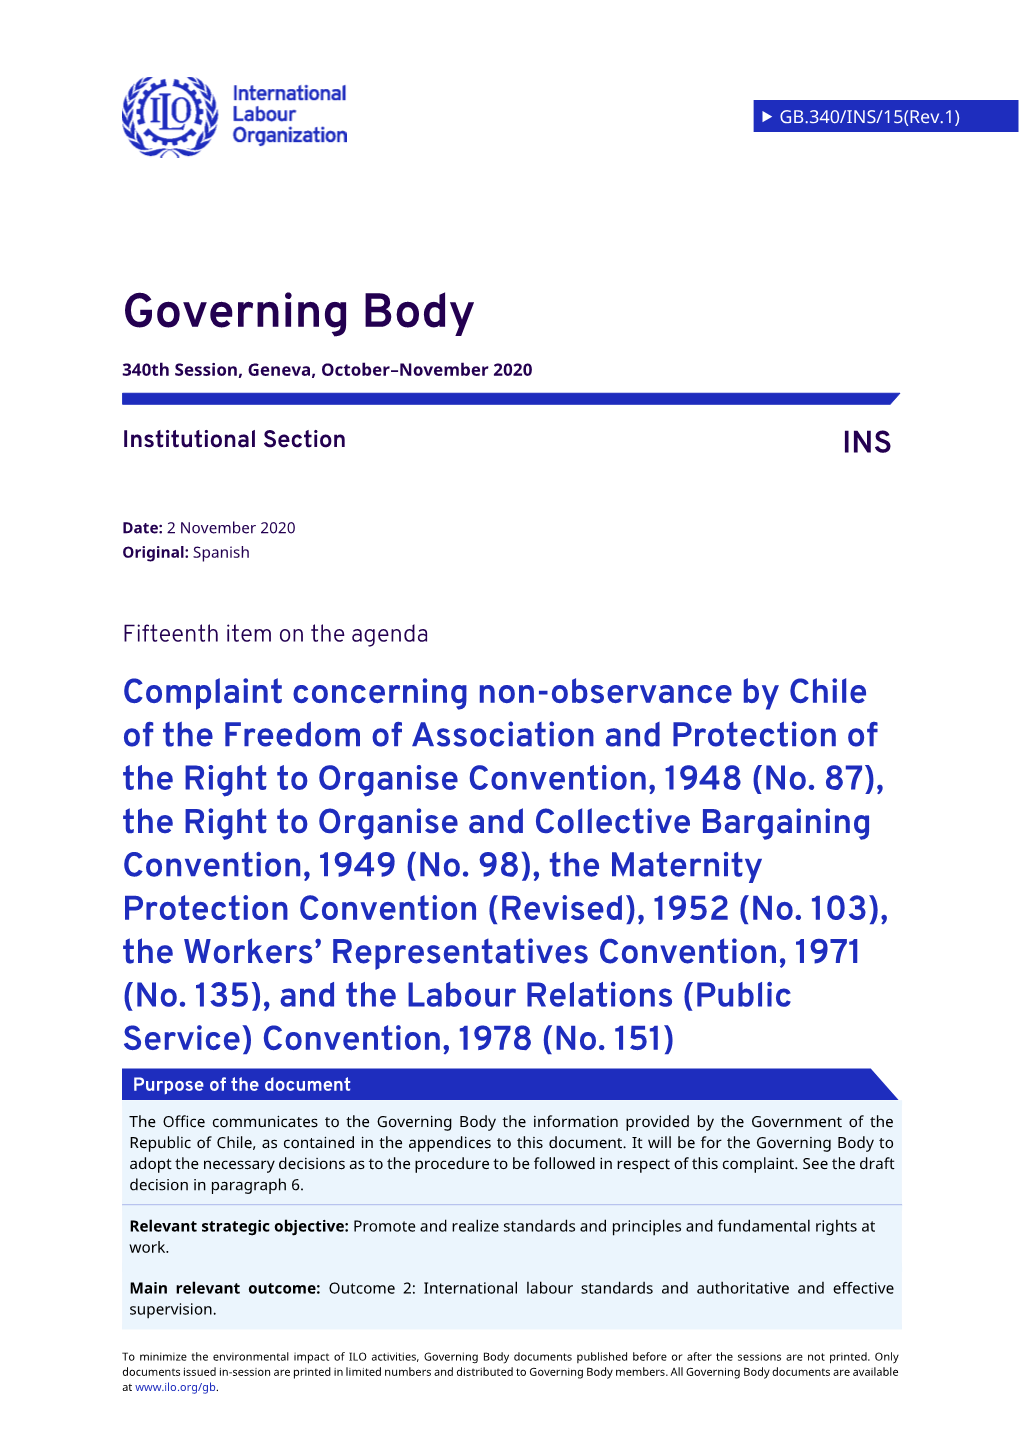 Complaint Concerning Non-Observance by Chile of the Freedom of Association and Protection of the Right to Organise Convention, 1948 (No